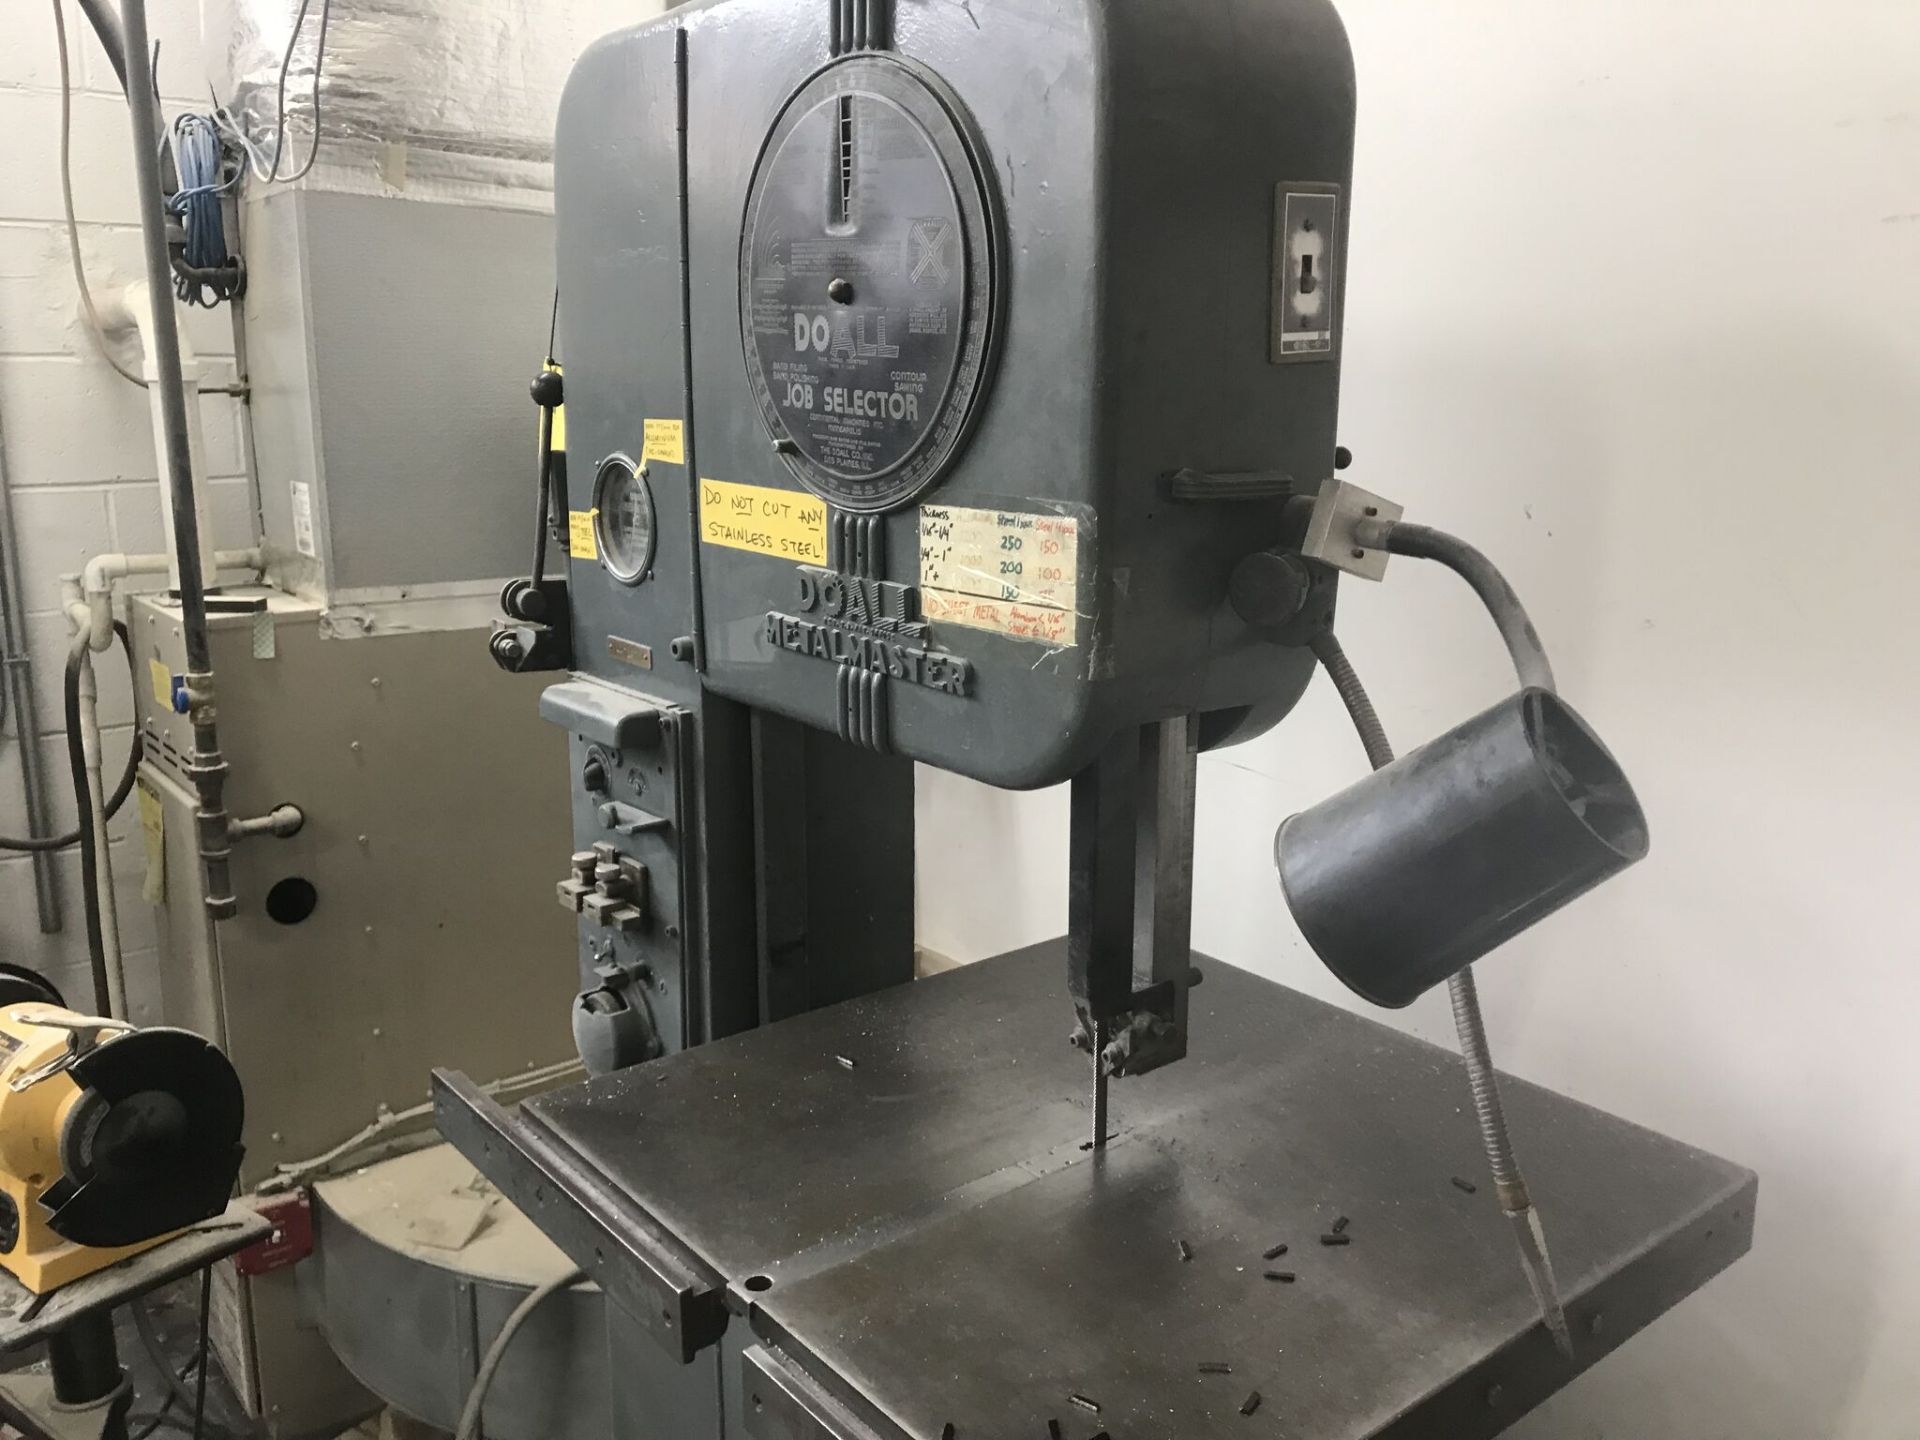 DoAll Contour Saw, Model #2035, Amps 30, Volts 230 - Image 2 of 5